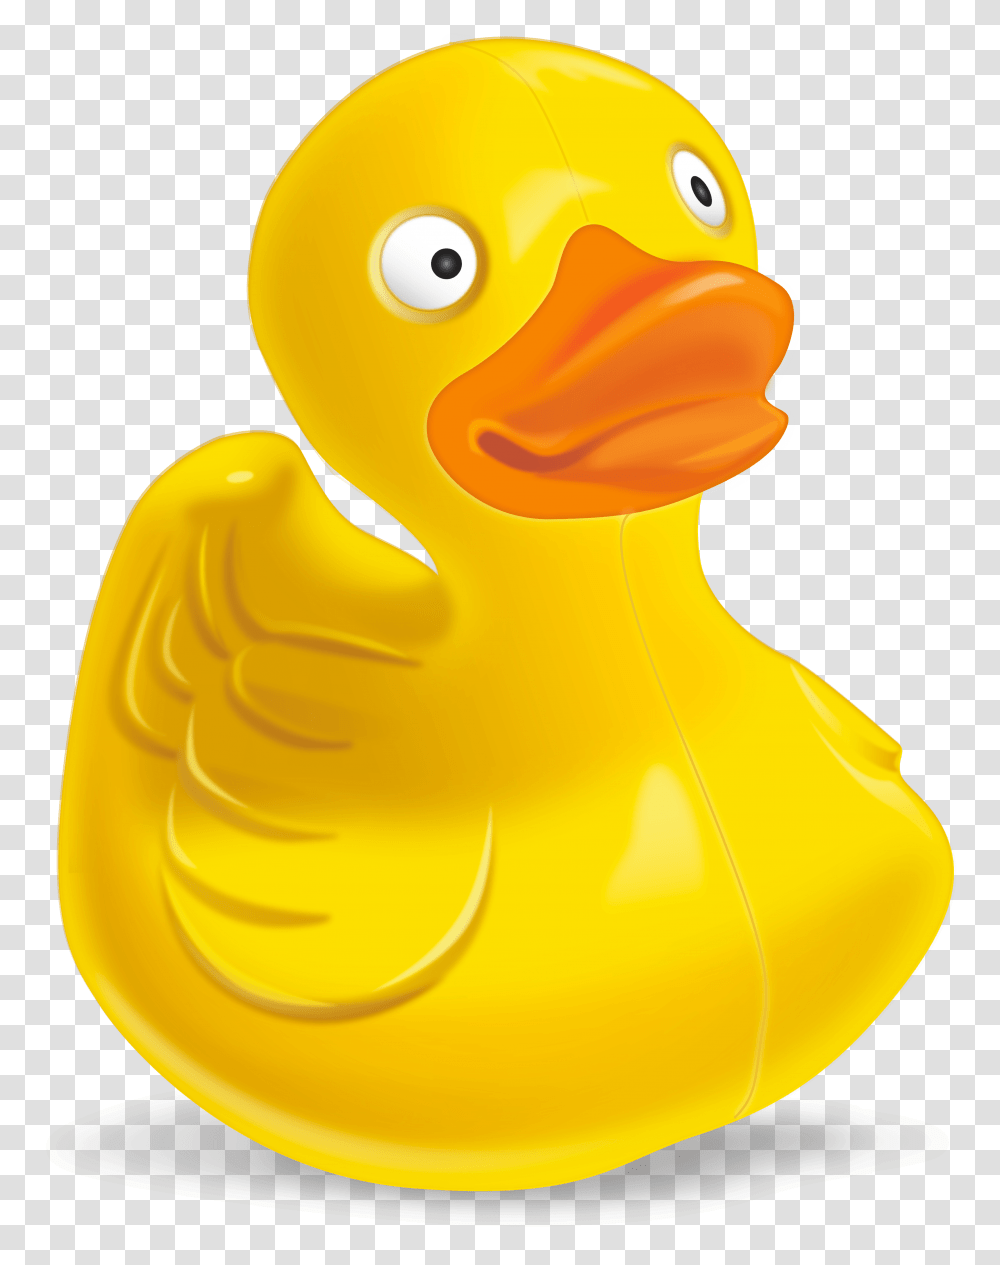 Free Rubber Duck Download Free Clip Art Free Clip, Animal, Bird, Dodo Transparent Png